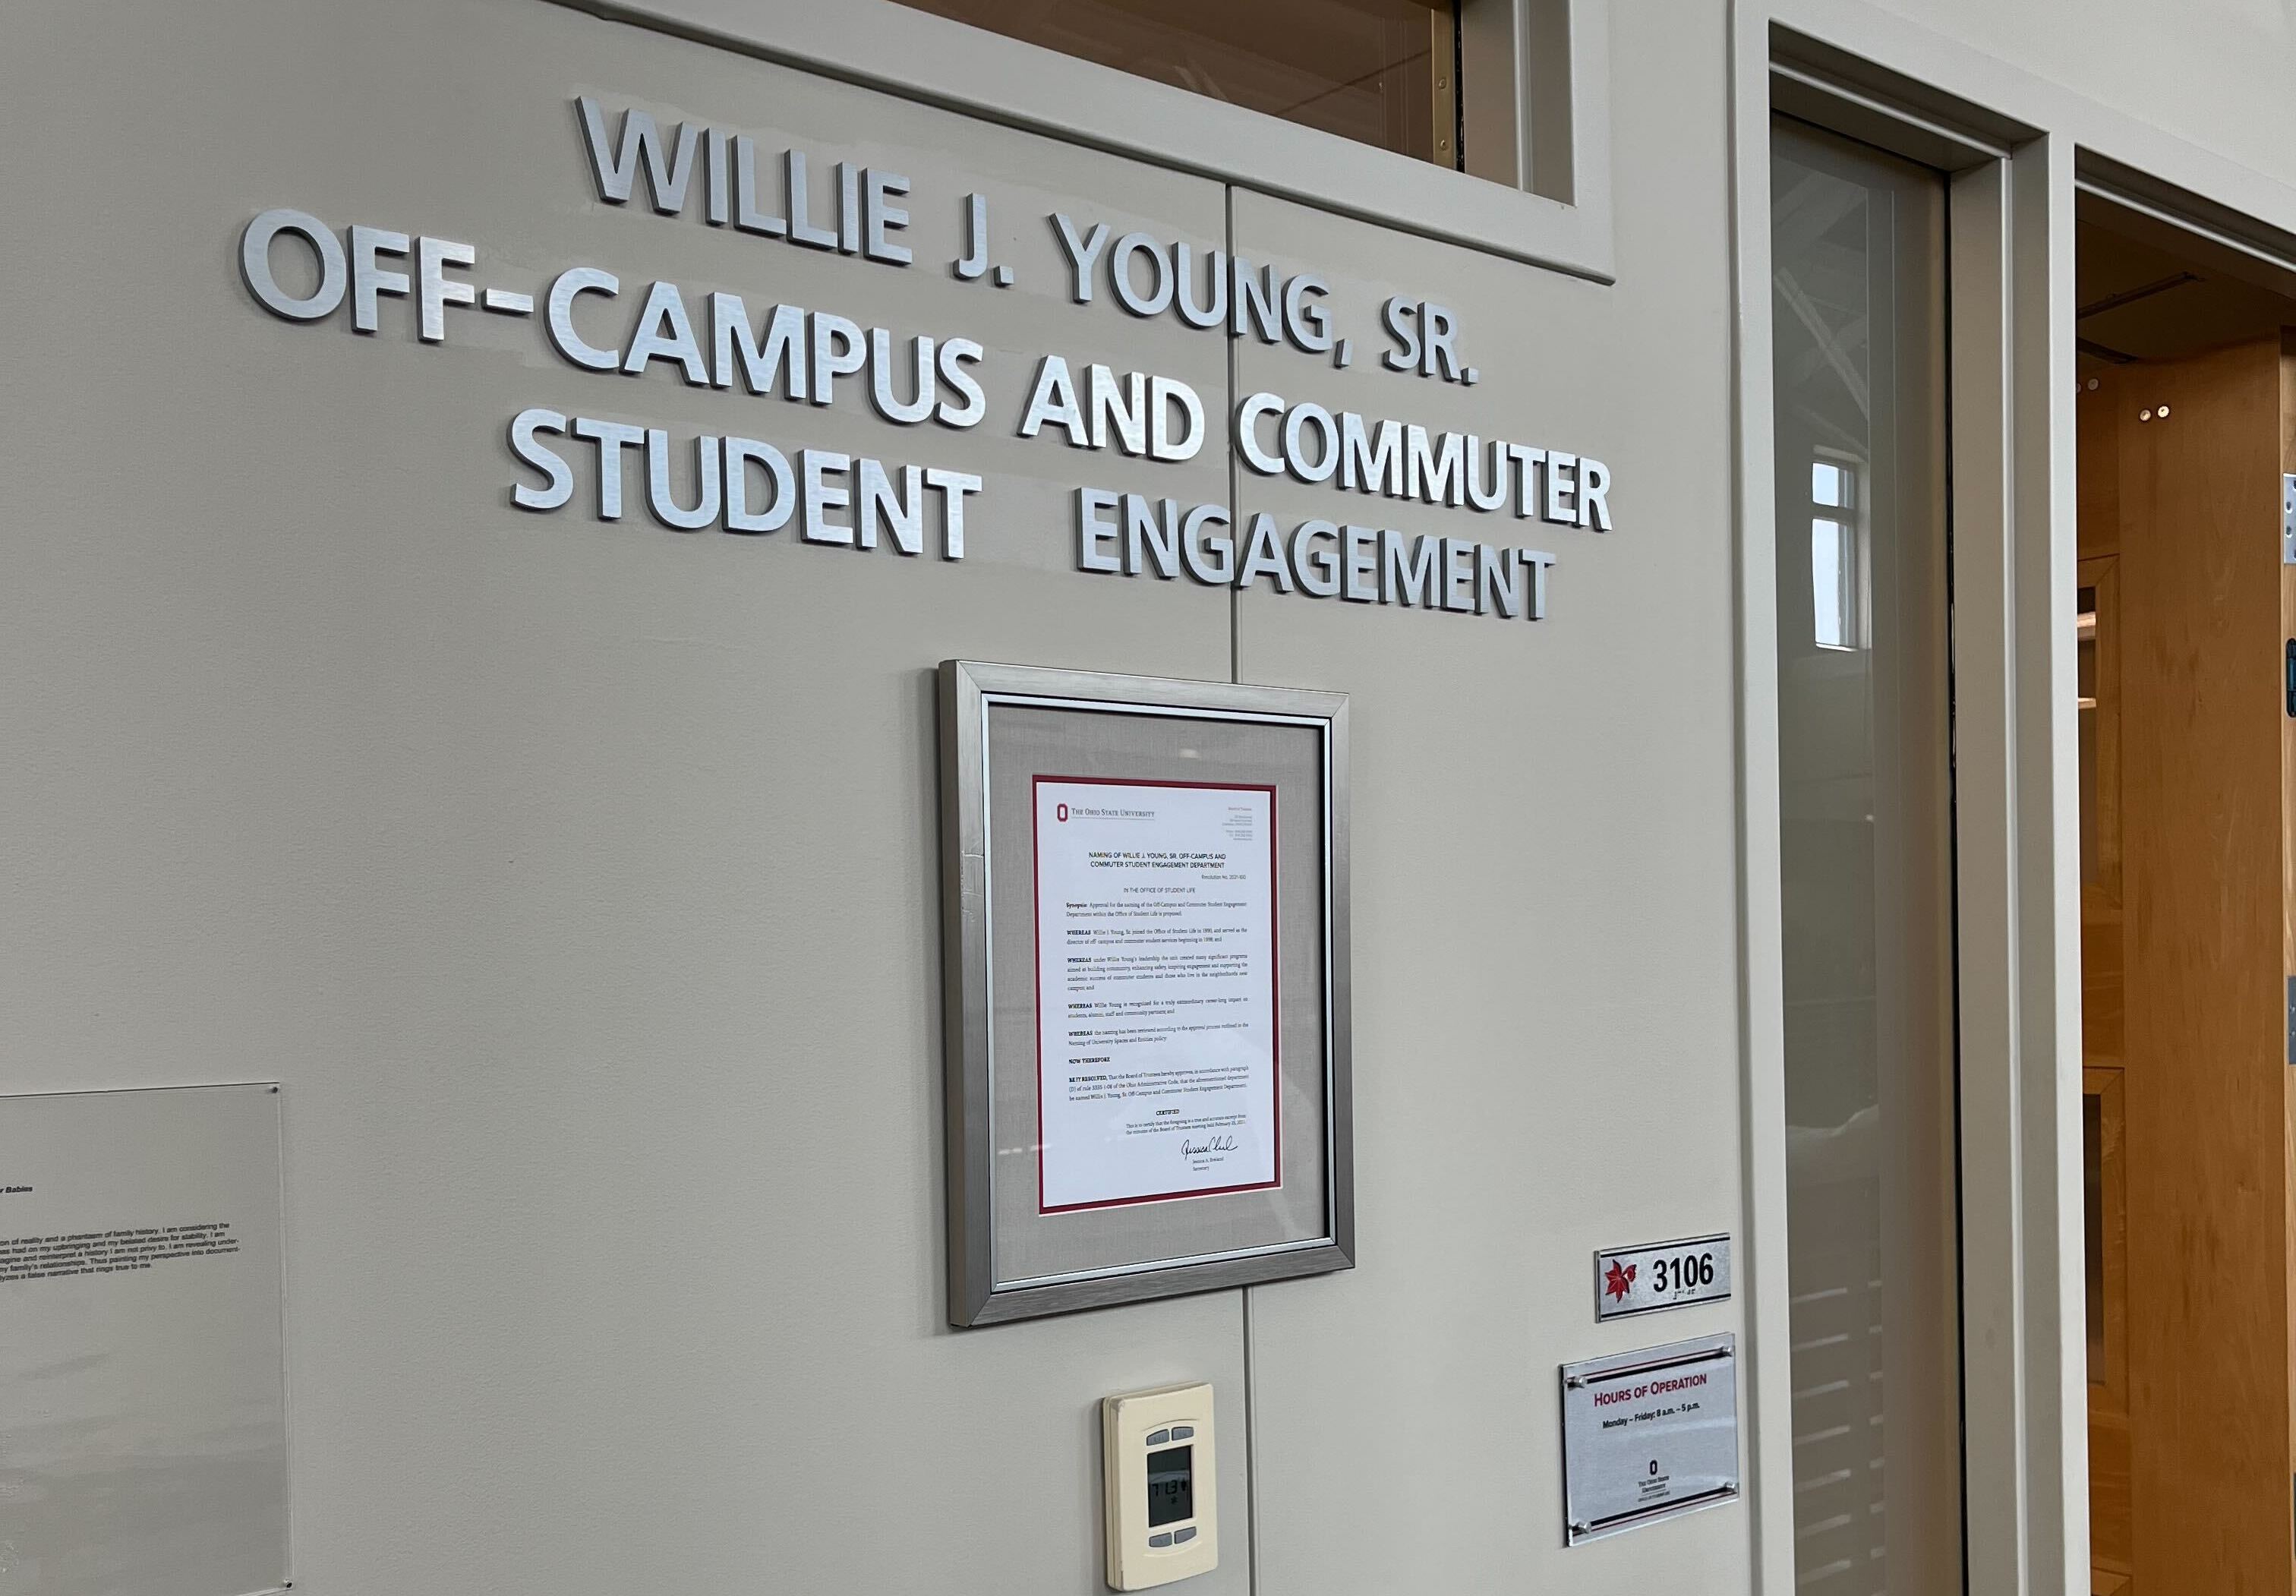 Off-Campus and Commuter Student Engagement office, located on the third floor of the Ohio Union